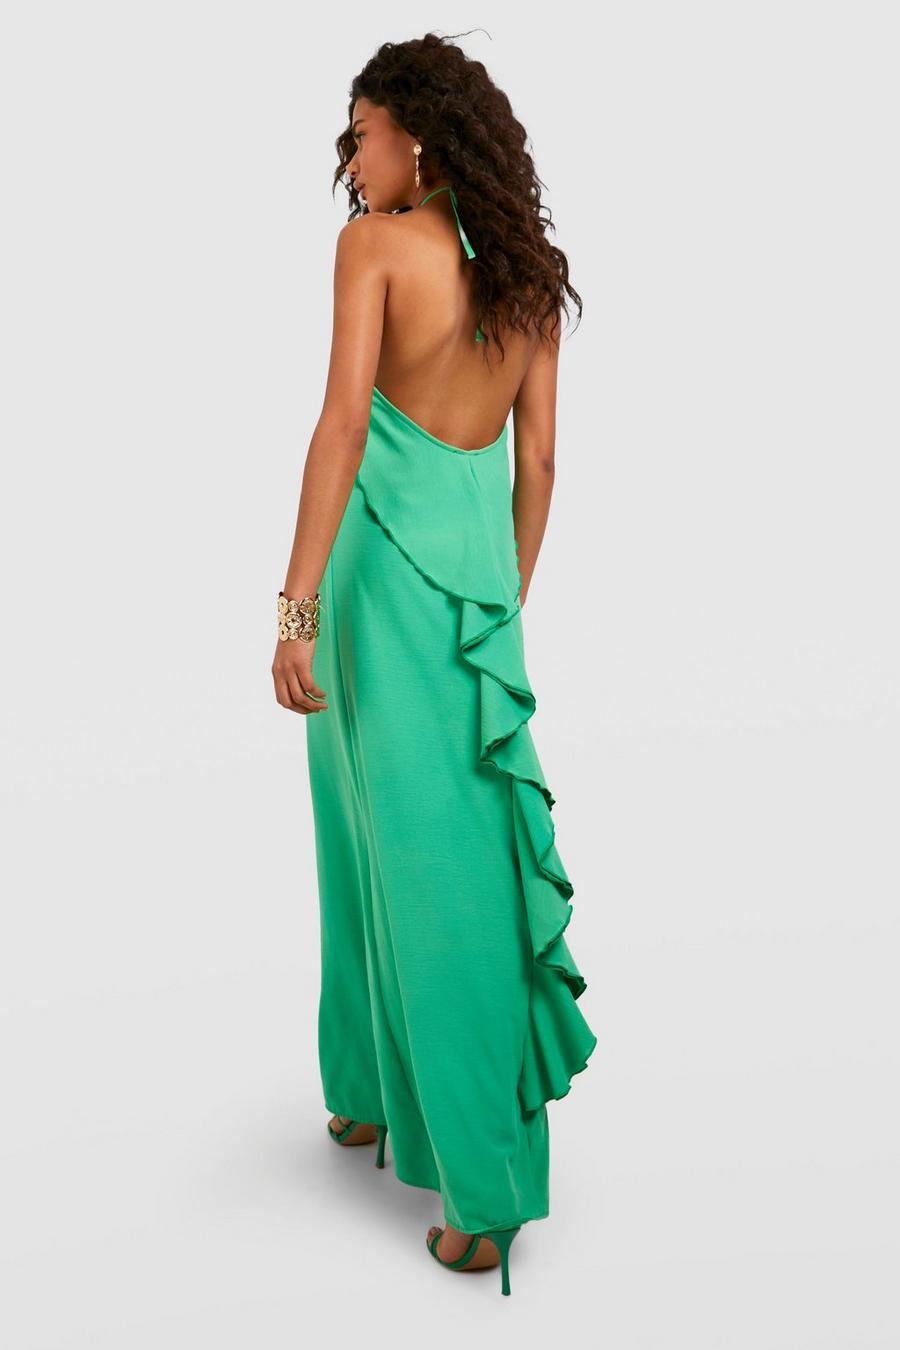 Bright green Cheesecloth Textured Low Back Ruffle Tiered Maxi Dress